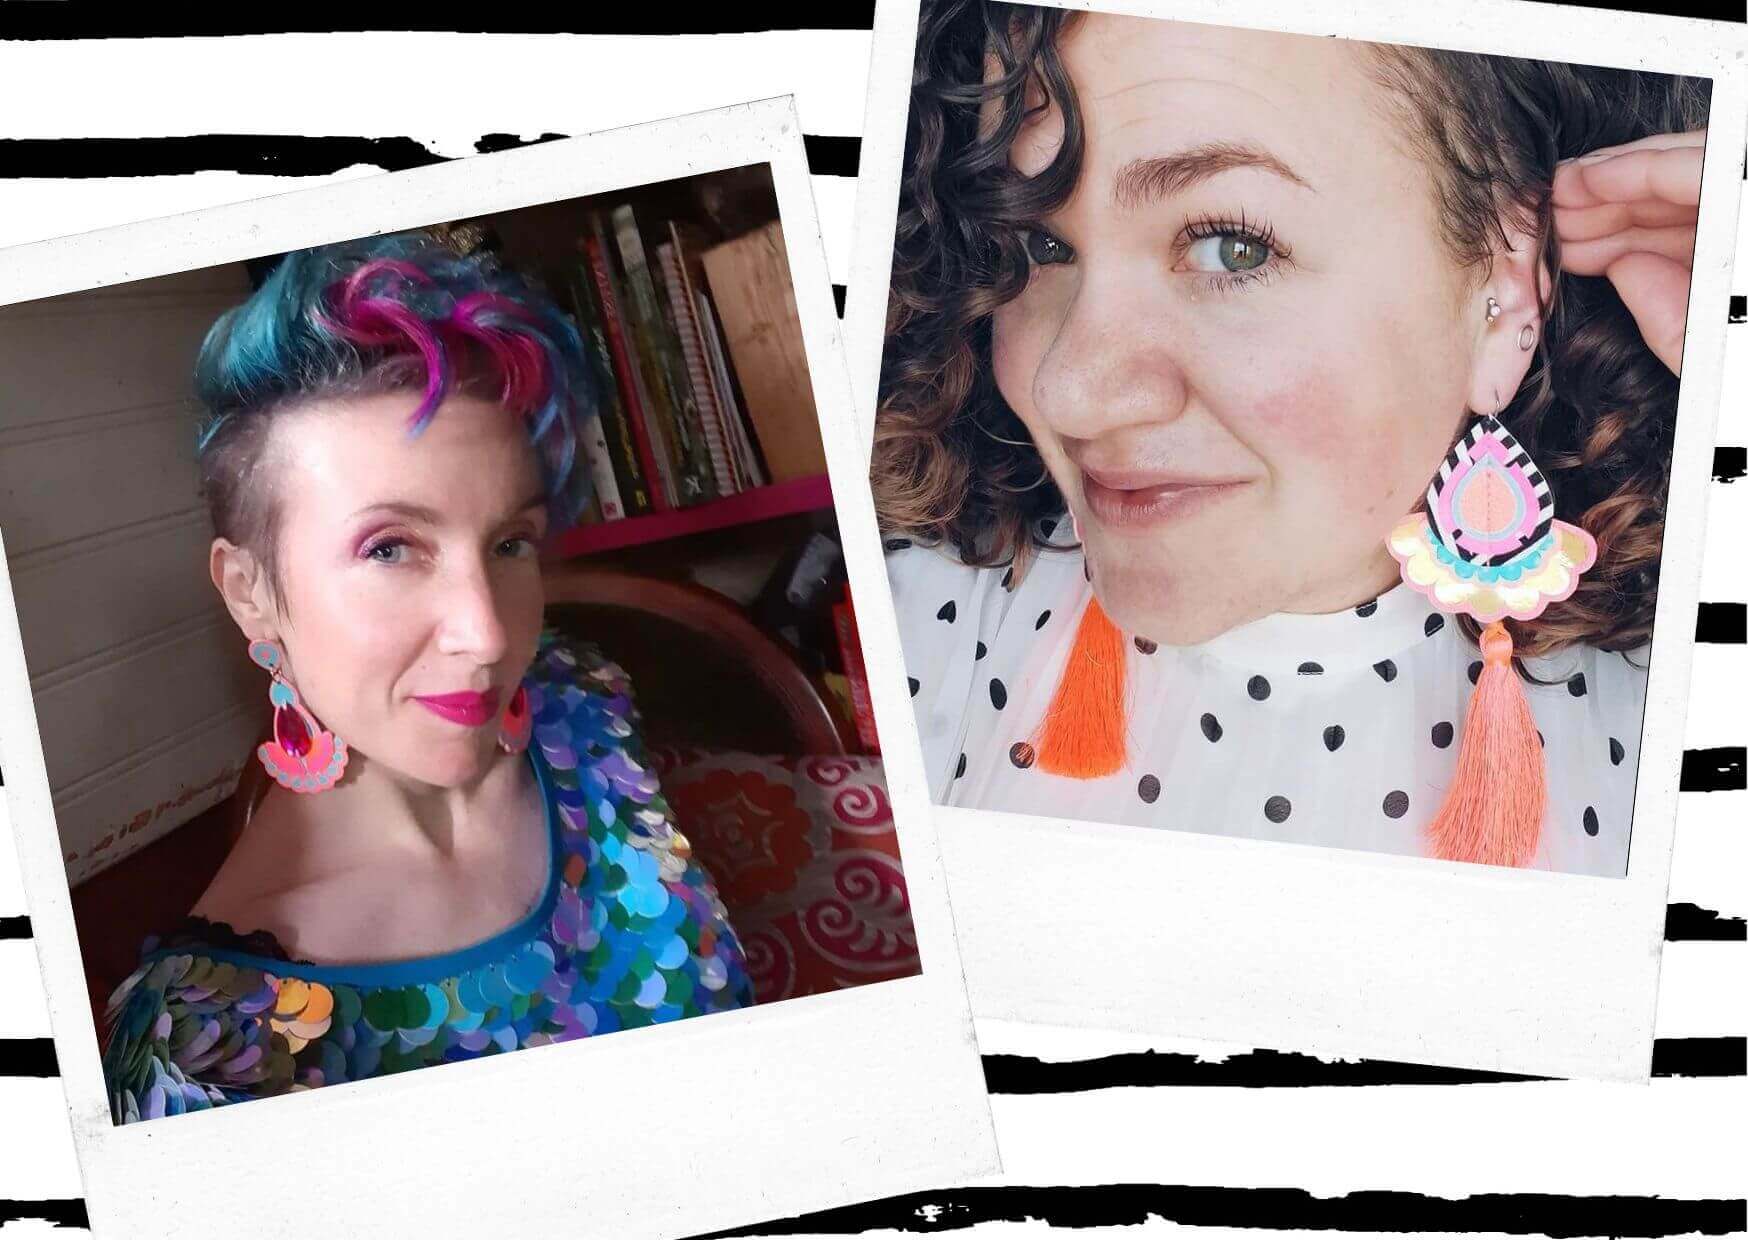 Two polaroid photos sit on a black and white stripey background. The photo on the left features a woman with short turquoise and pink hair and pink lips, smiling at the camera. she is wearing pink and turquoise statement earrings and a sequinned top. The photo on the right is a close up of a woman with curly brown hair and brown eyes. She is wearing a white top with black polka dots and colourful tassel earrings. She is using her hand to tuck her hair behind her ear to better show off the earring and looking into the camera